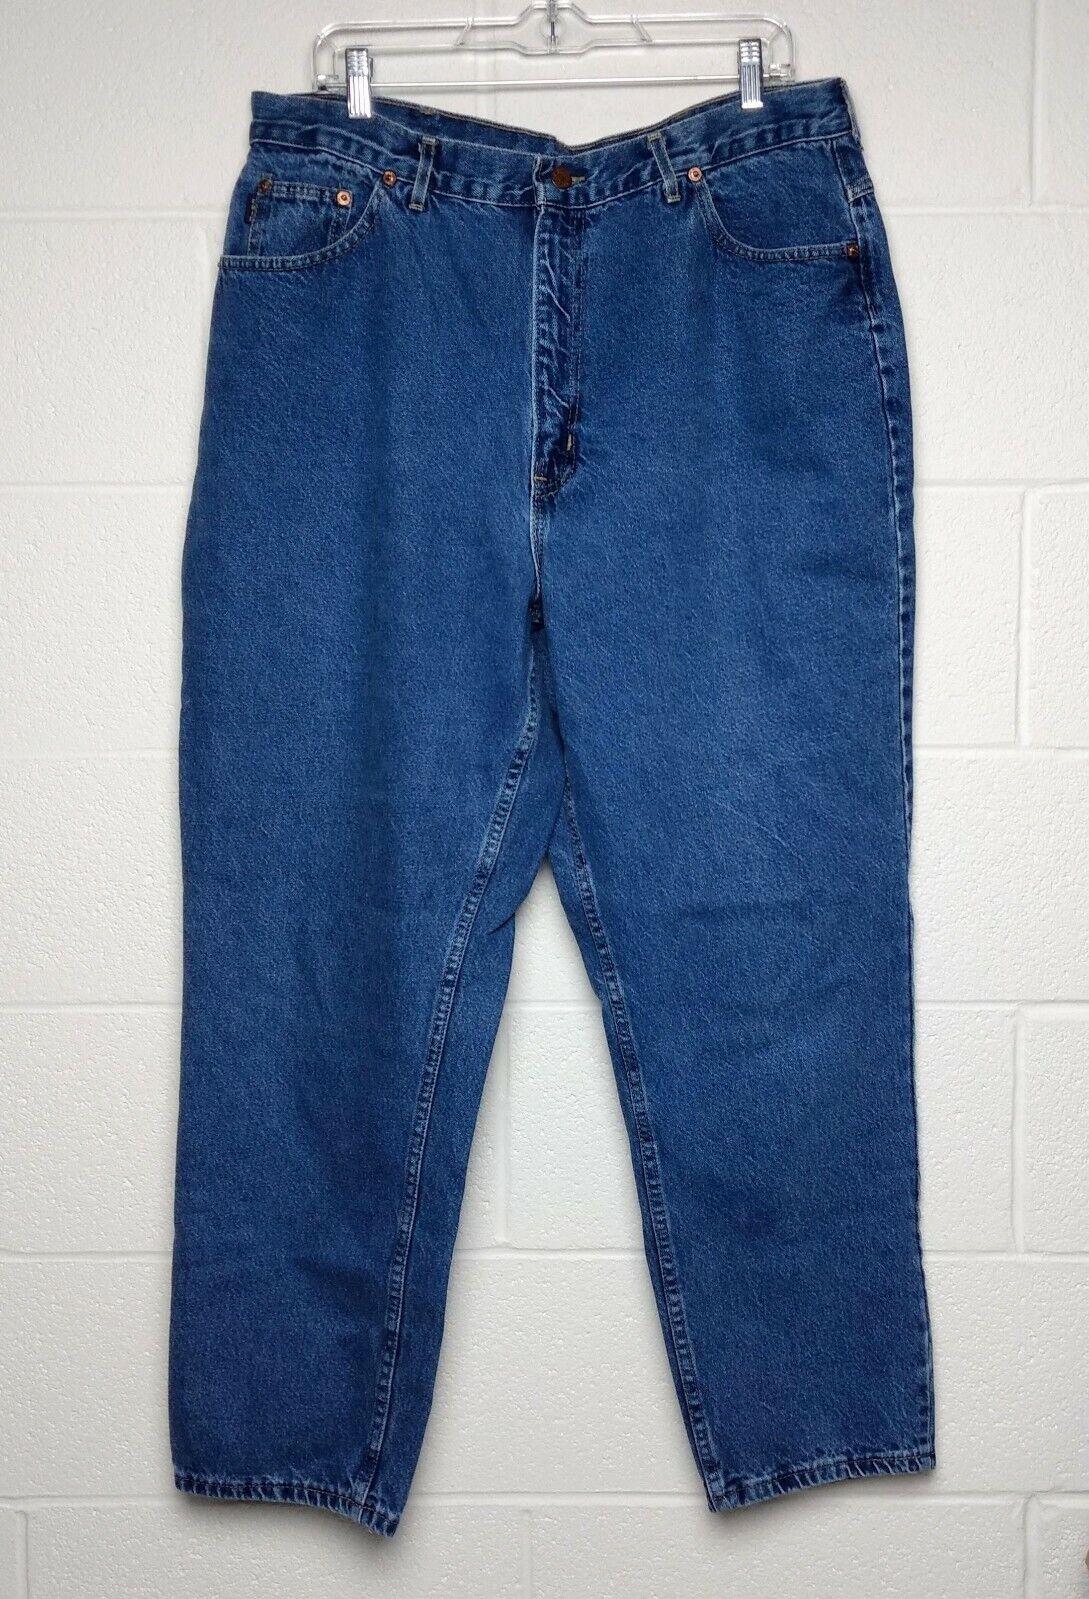 Vintage 90s Chic High Waist Tapered Leg sz 16 Jeans Made in USA Mom Jeans 34x29